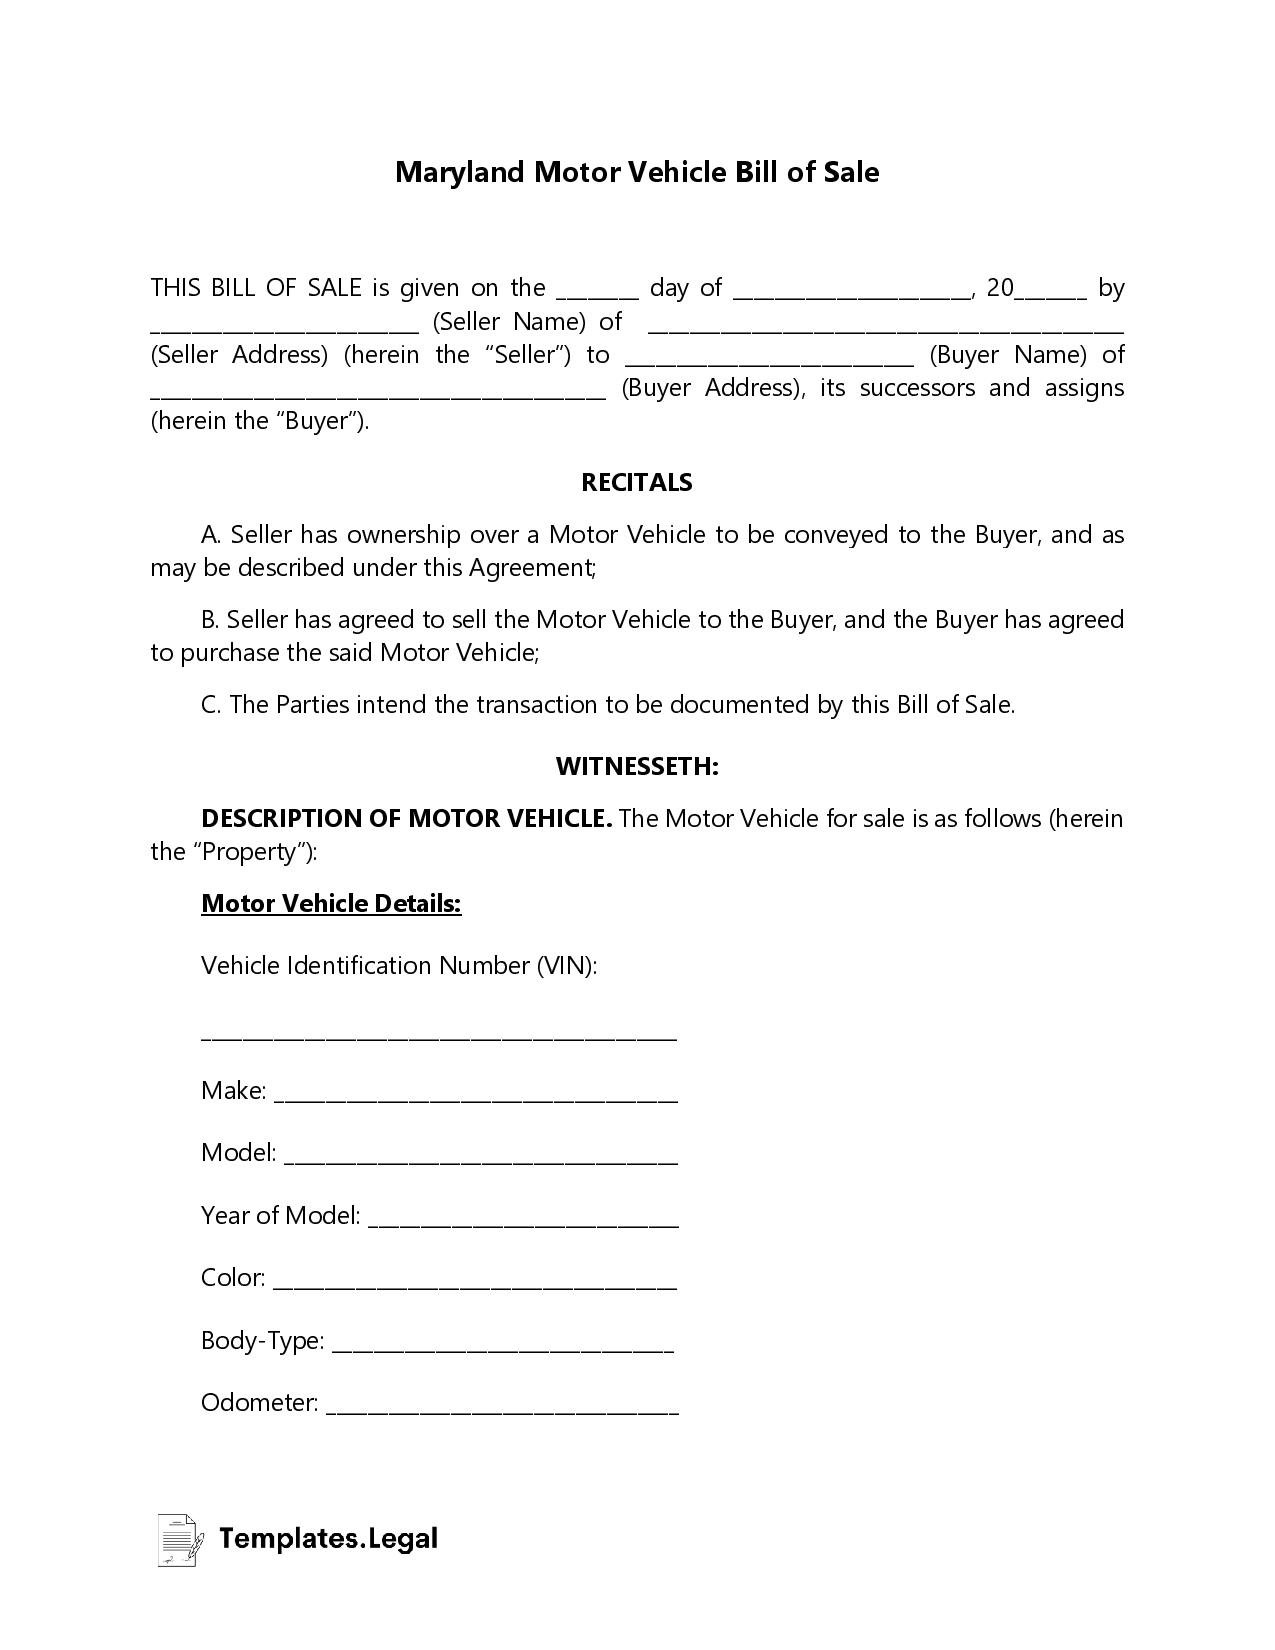 Maryland Motor Vehicle Bill of Sale - Templates.Legal